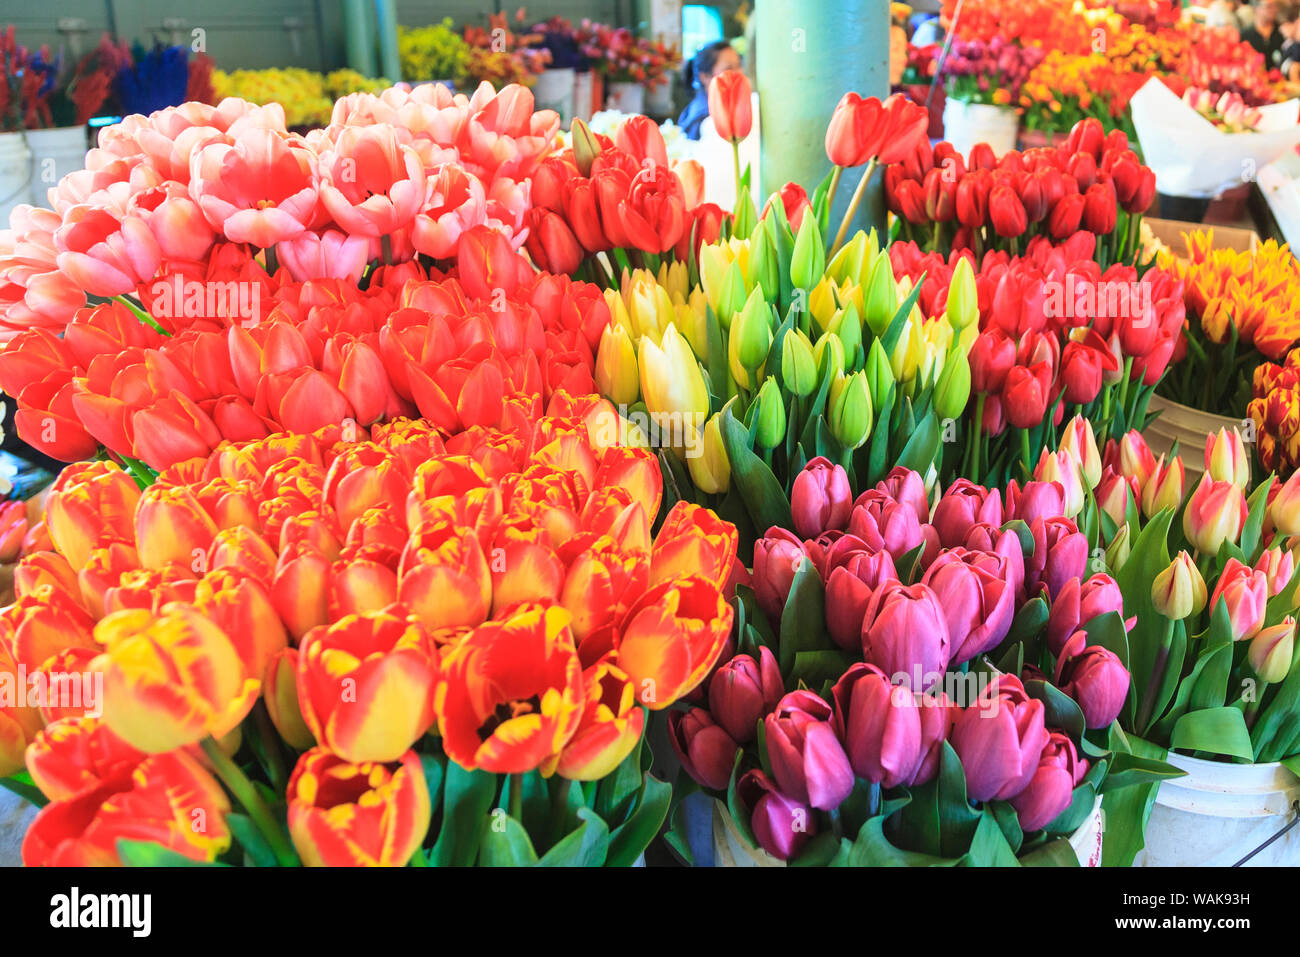 Flowers for sale at Pike Place Market in late spring, Seattle, Washington State, USA Stock Photo